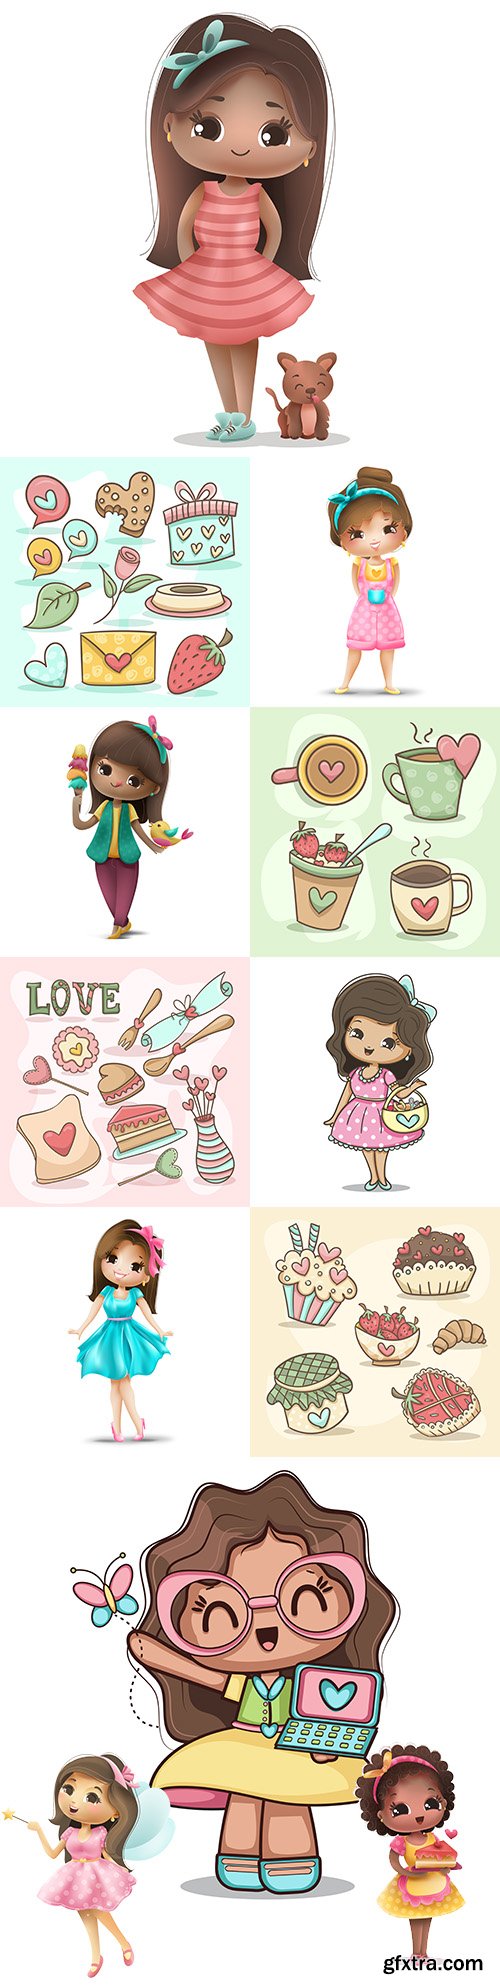 Cute girl and delicious sweets with drinks illustration
